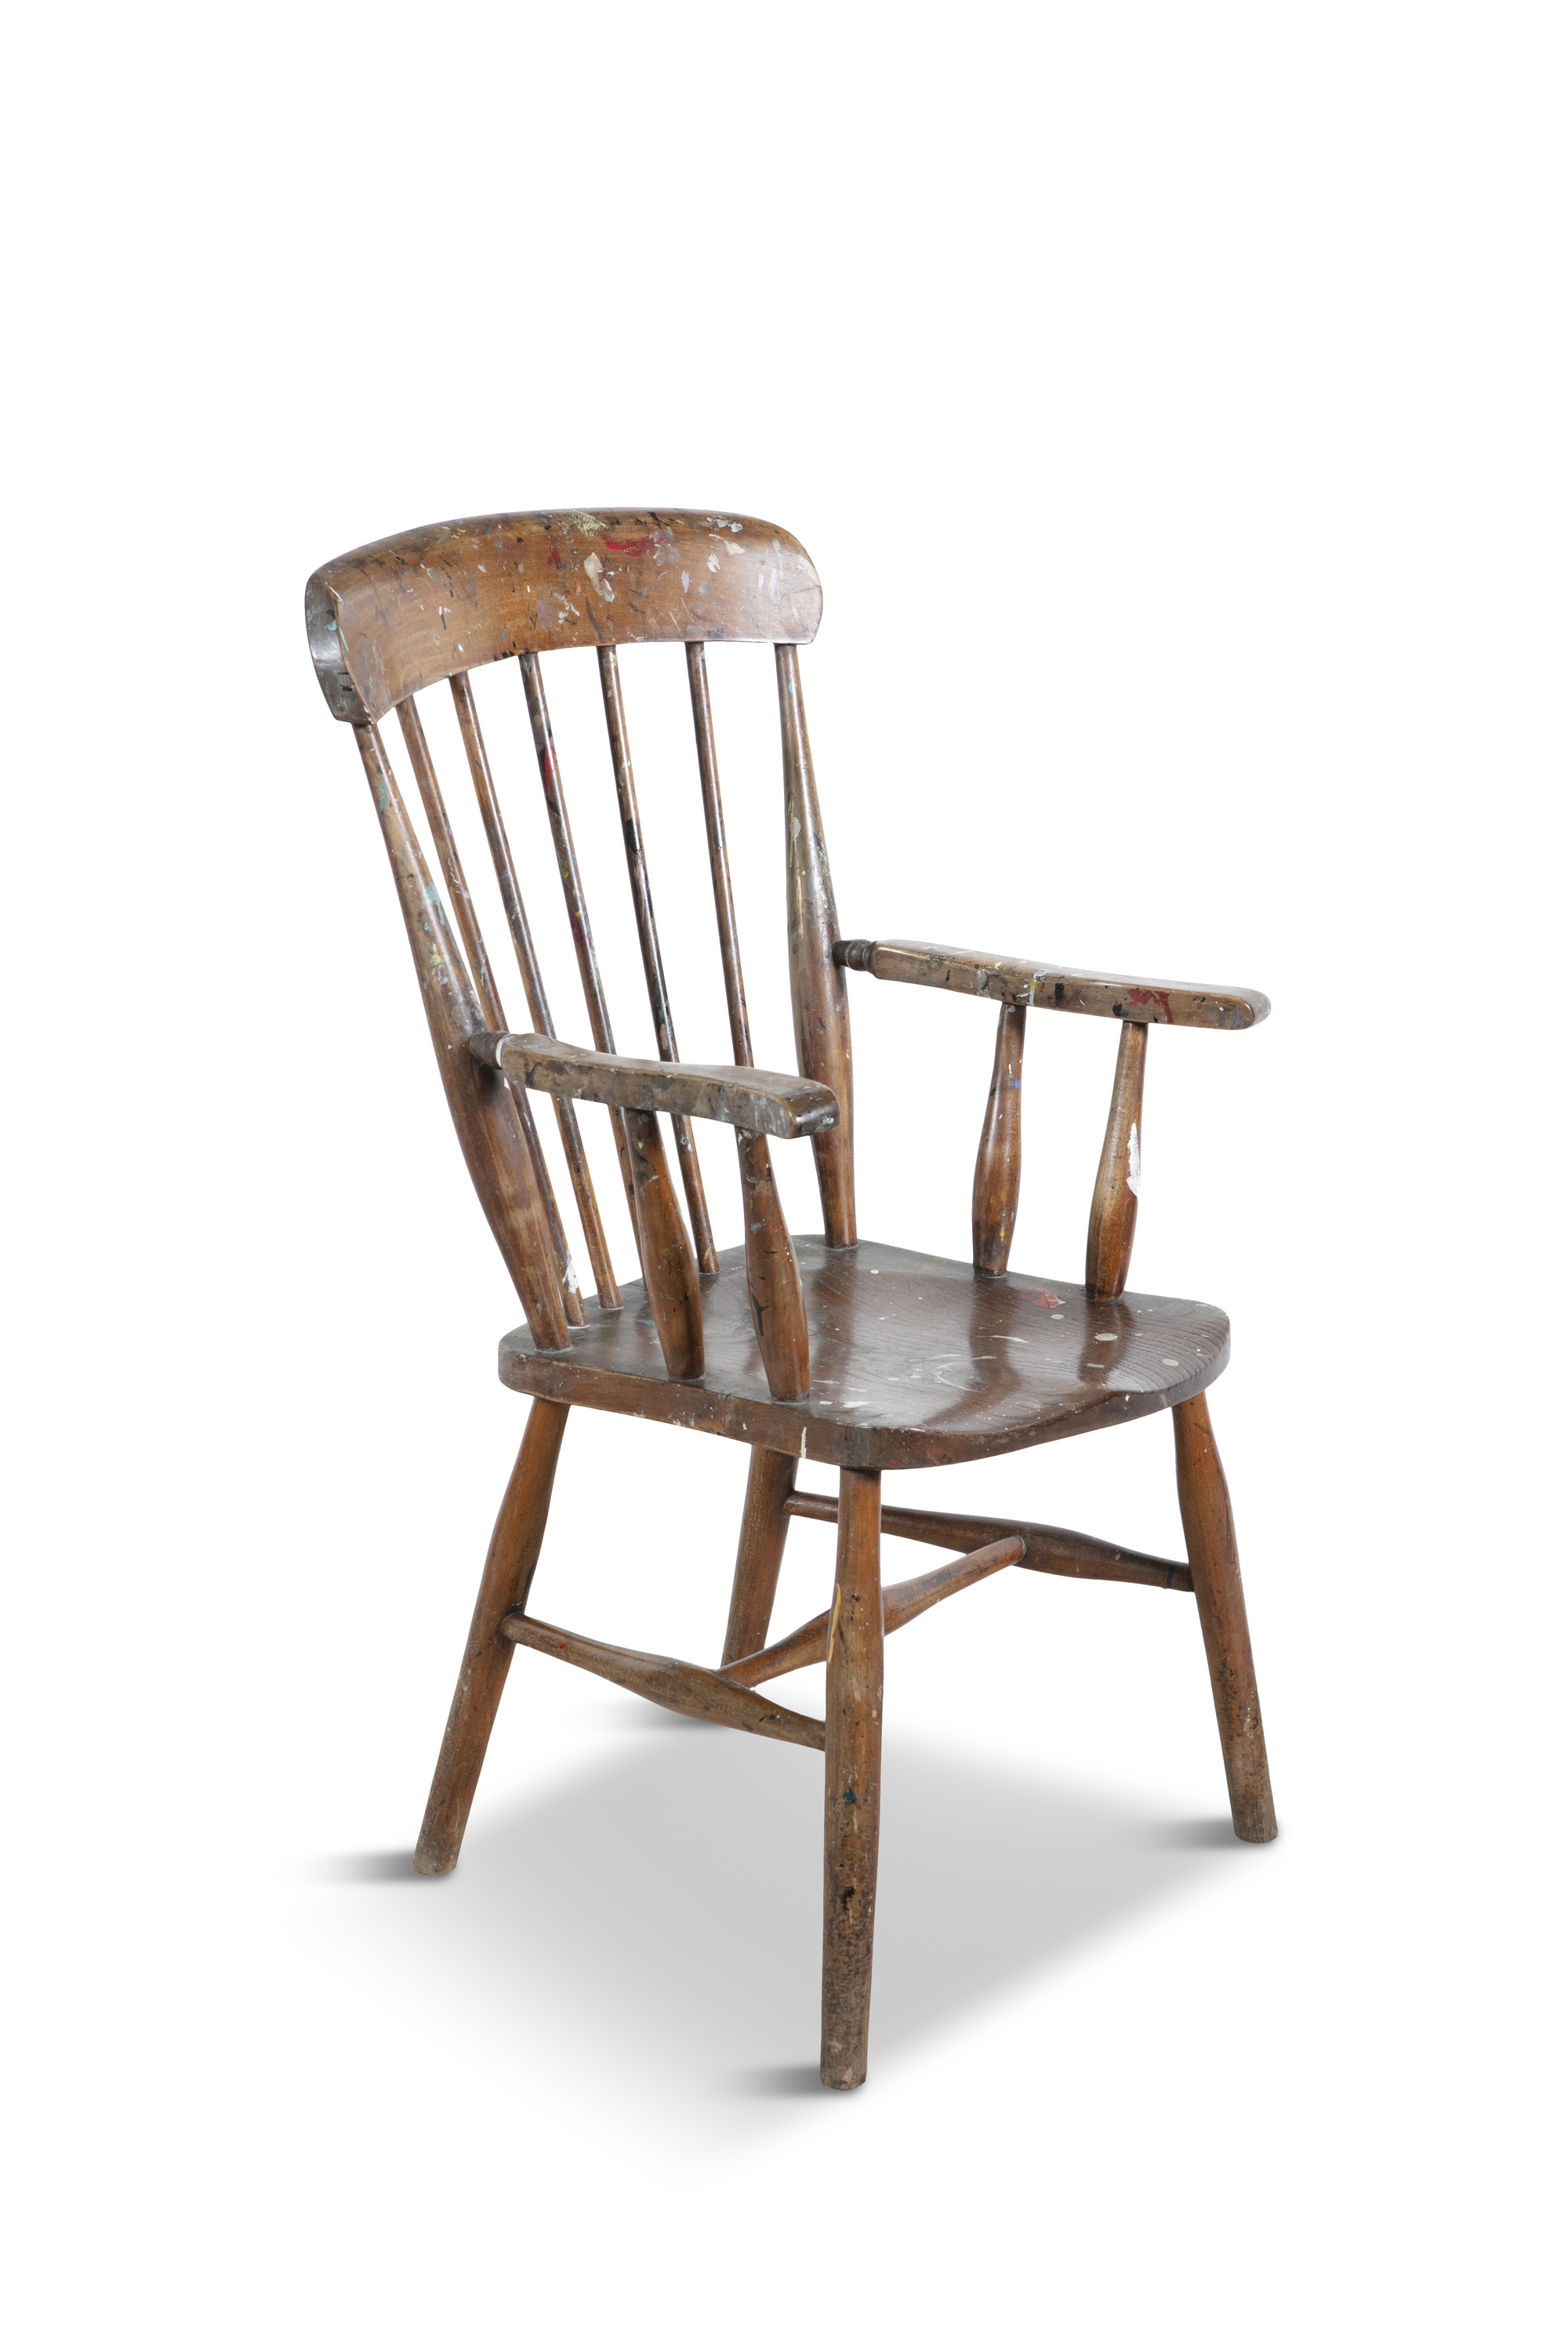 A BEACH AND ELMWOOD WINDSOR CHAIR, with seven-bar rack, curved top rail and moulded seat, on